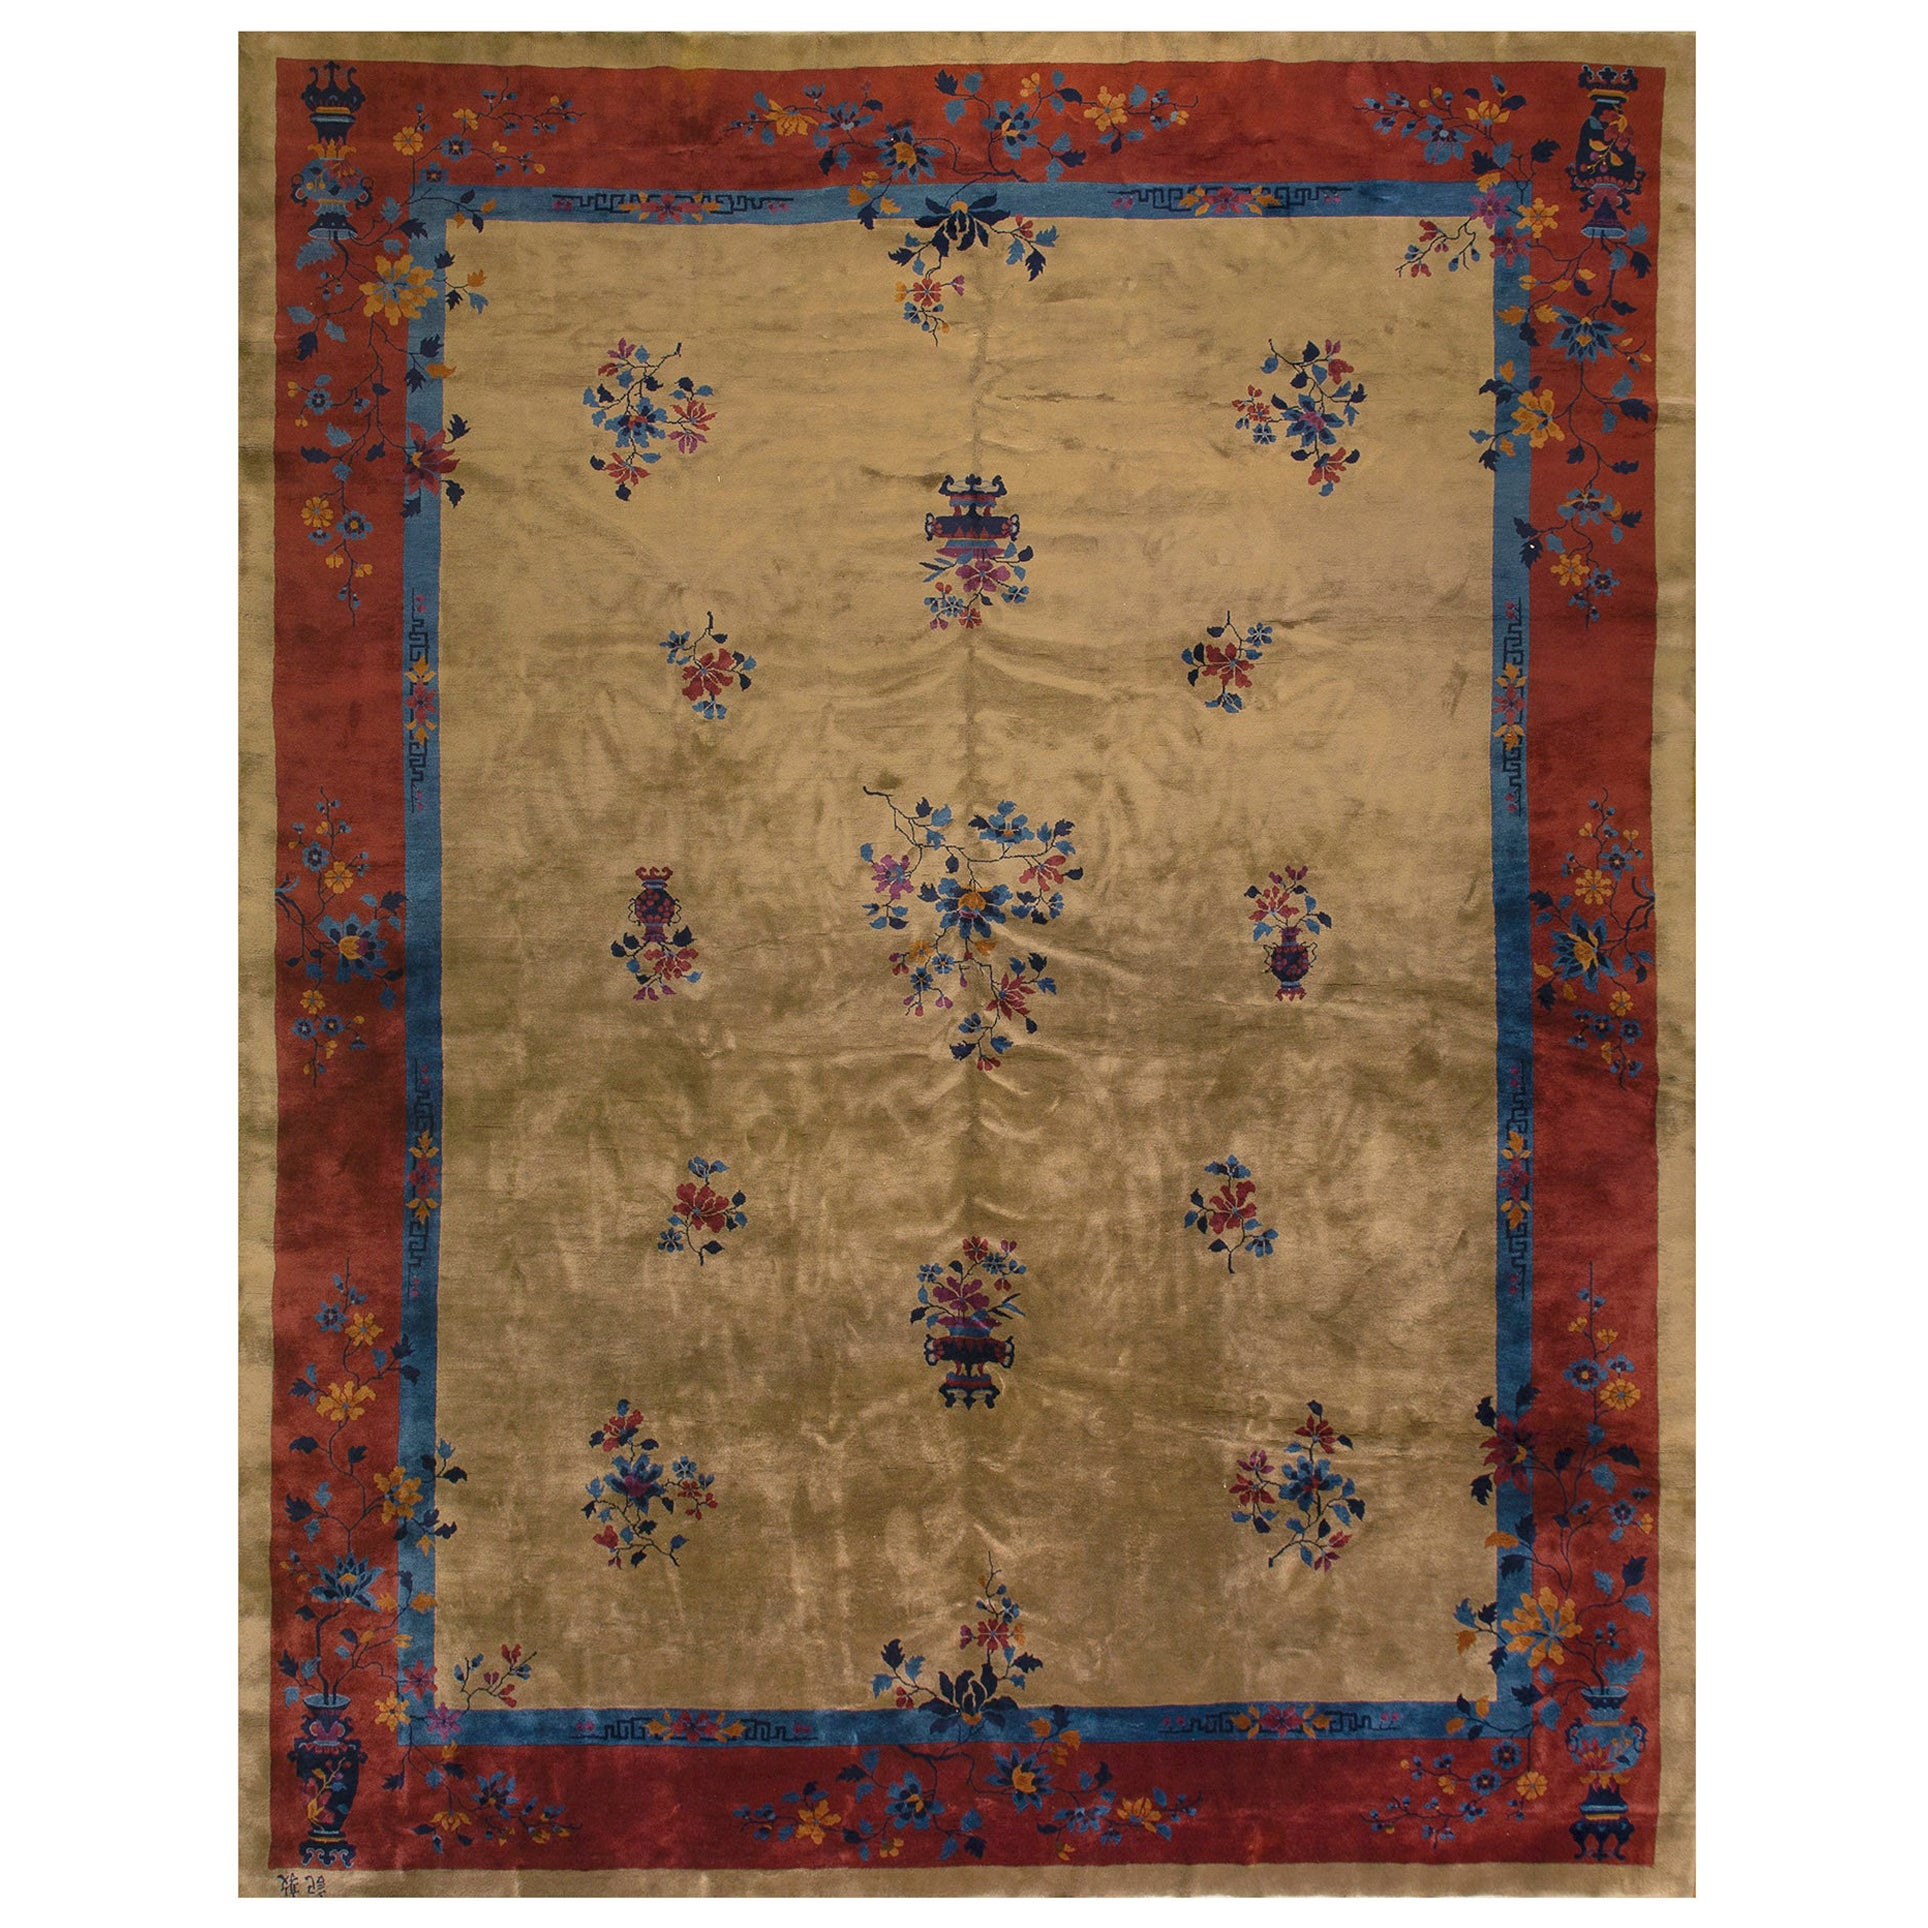 Early 20th Century Chinese Manchester Quality Peking Carpet ( 12' x 15'6" )